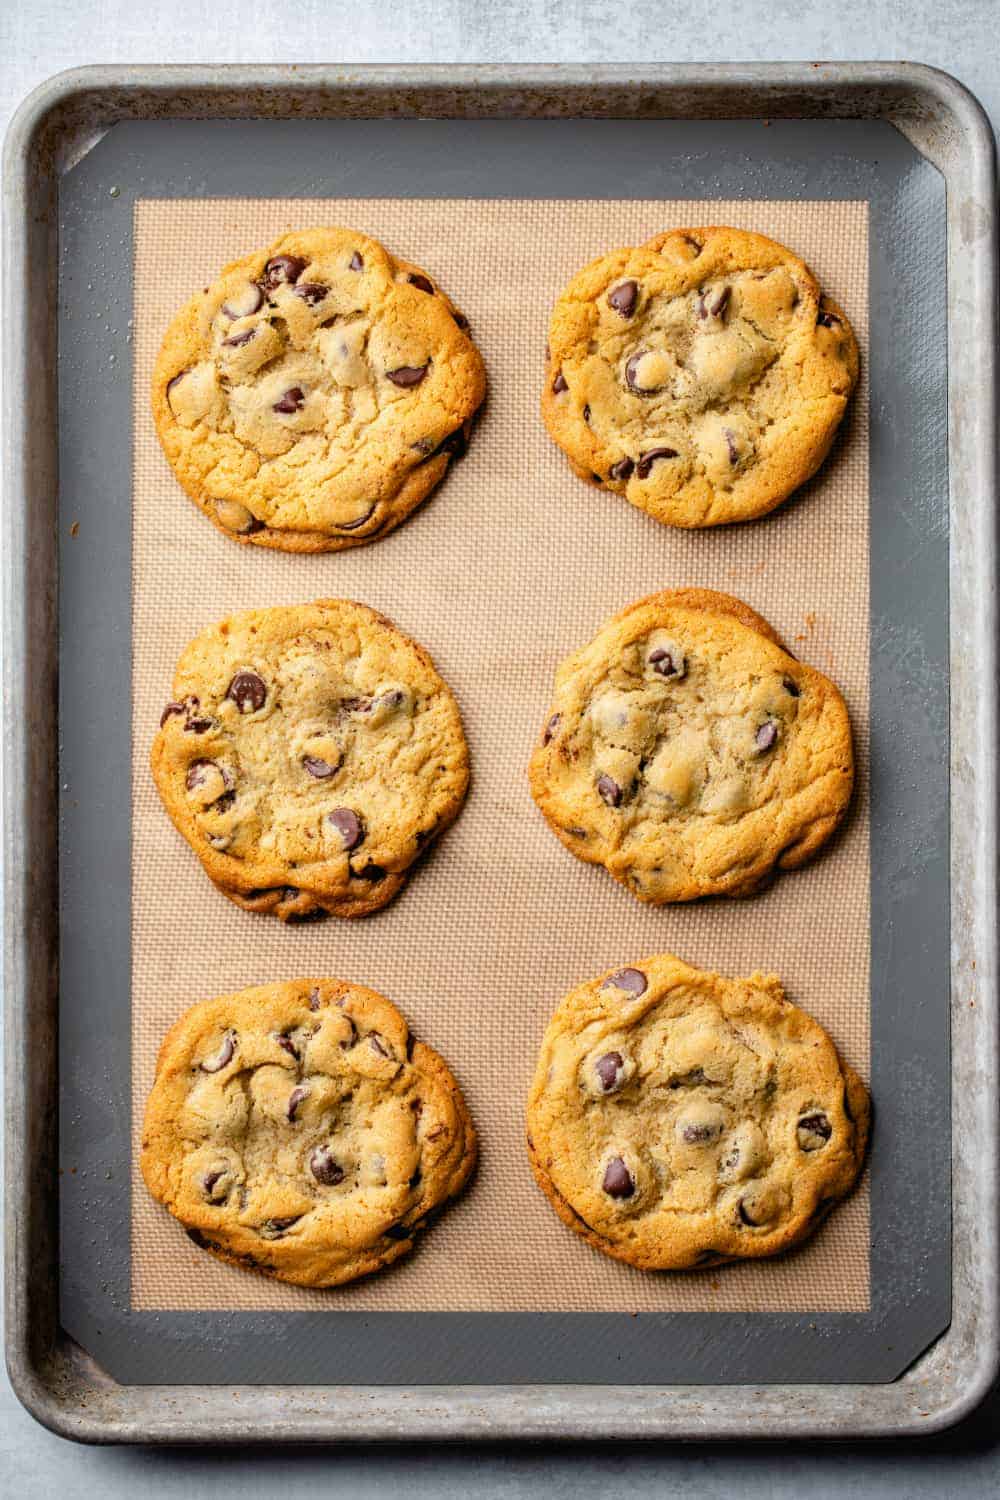 Whip up a batch of the chewiest, best chocolate chip cookies with my favorite chocolate chip cookie recipe!